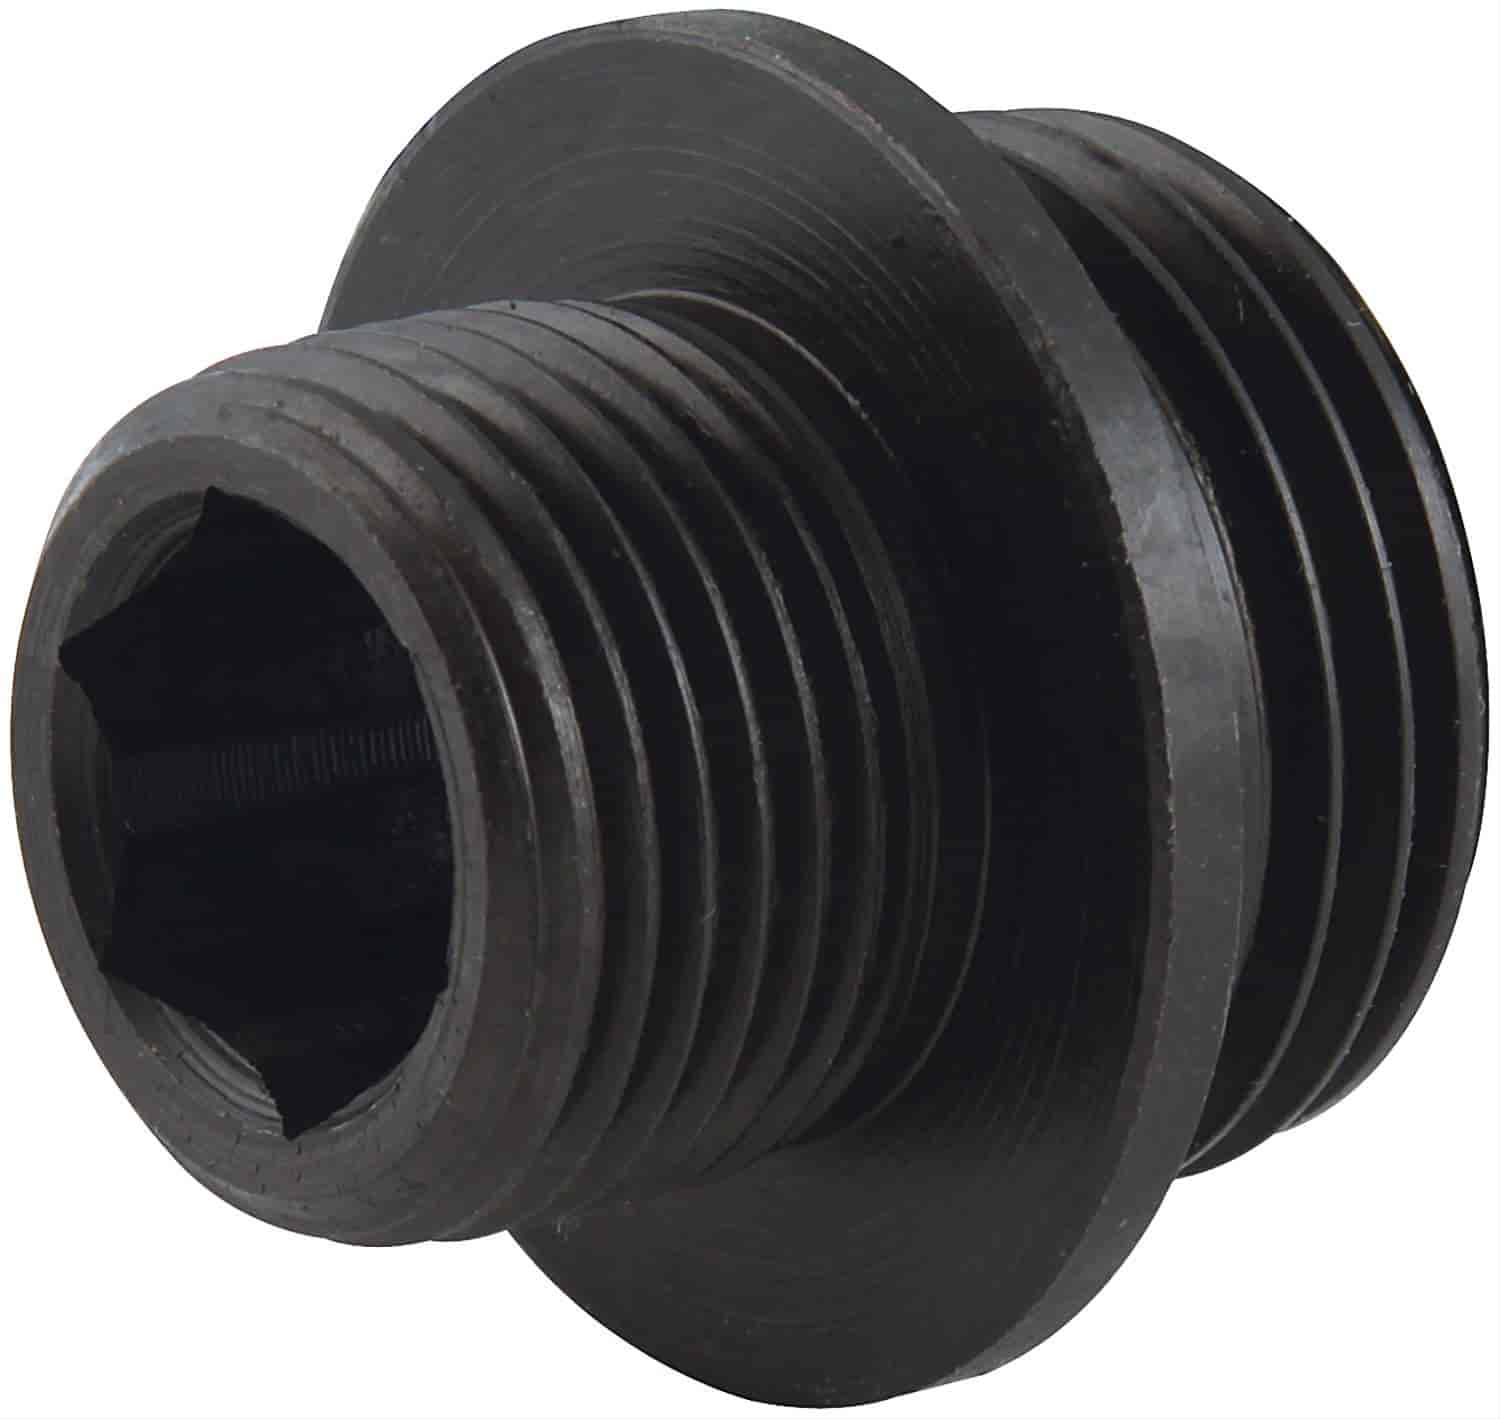 Oil Filter Adapter Big Block Chevy